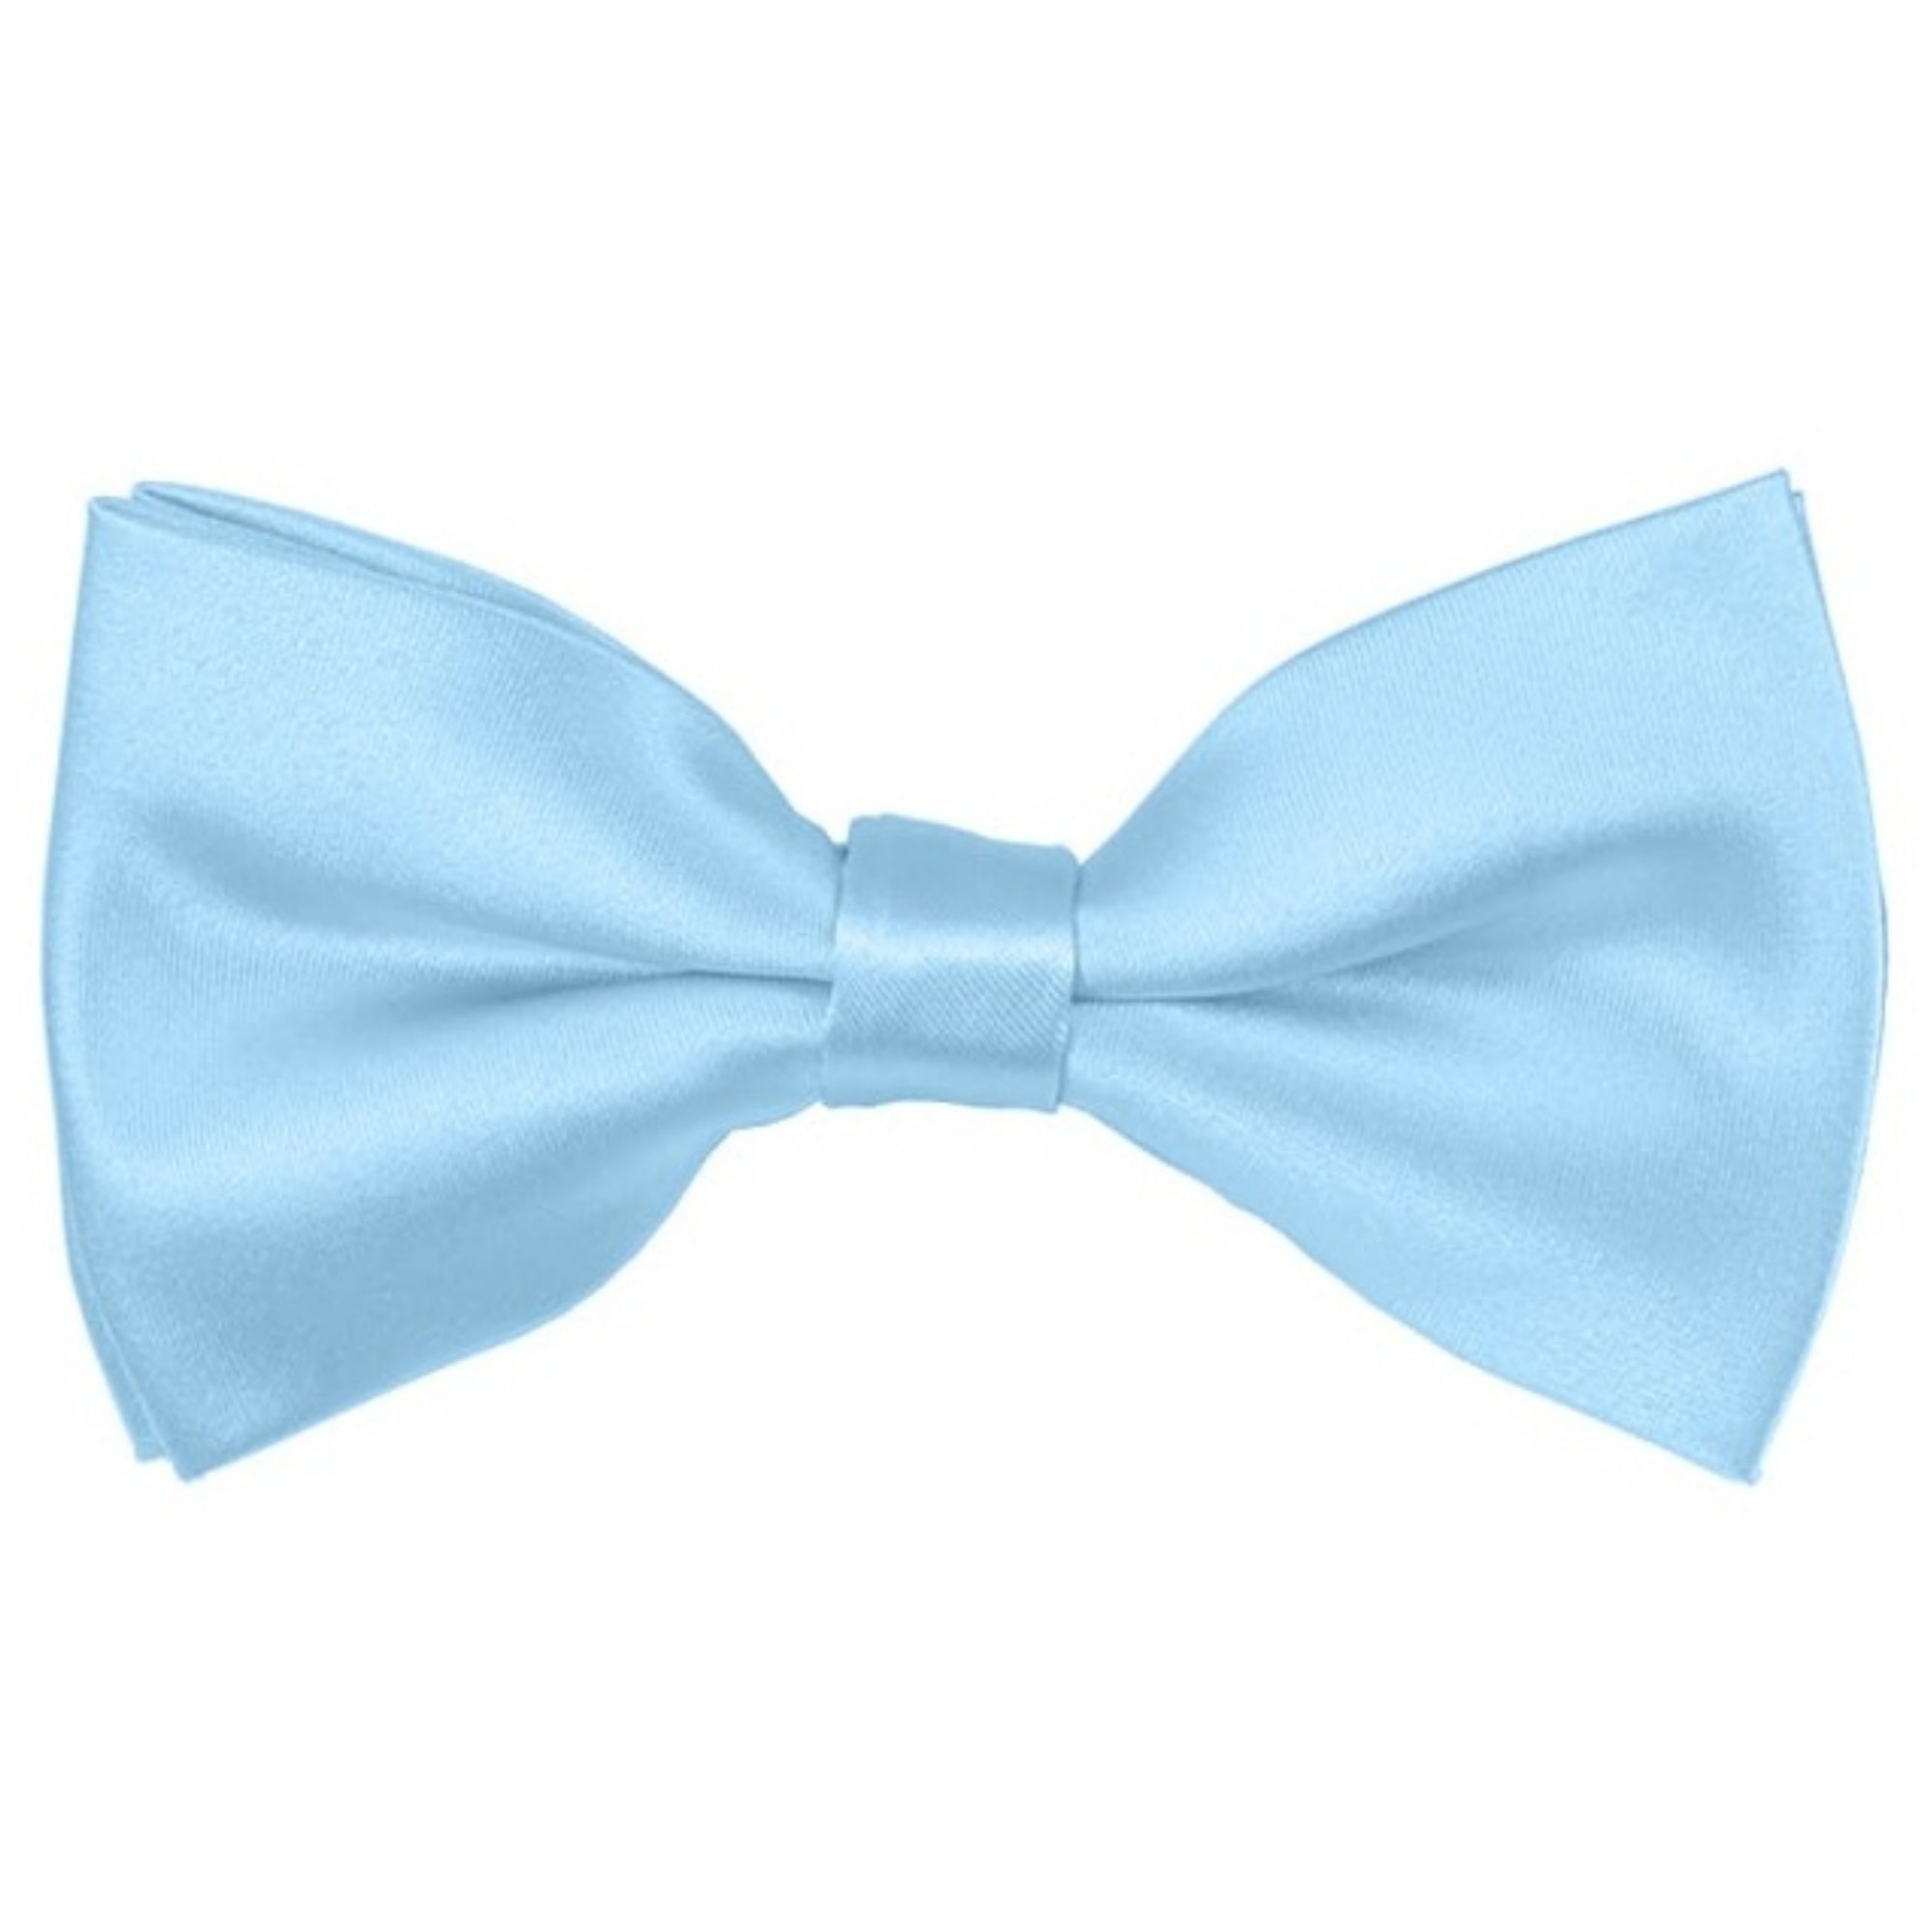 TheDapperTie Men's Solid Color 2.5 W And 4.5 L Inch Pre-Tied adjustable Bow Ties Men's Solid Color Bow Tie TheDapperTie Powder Blue  